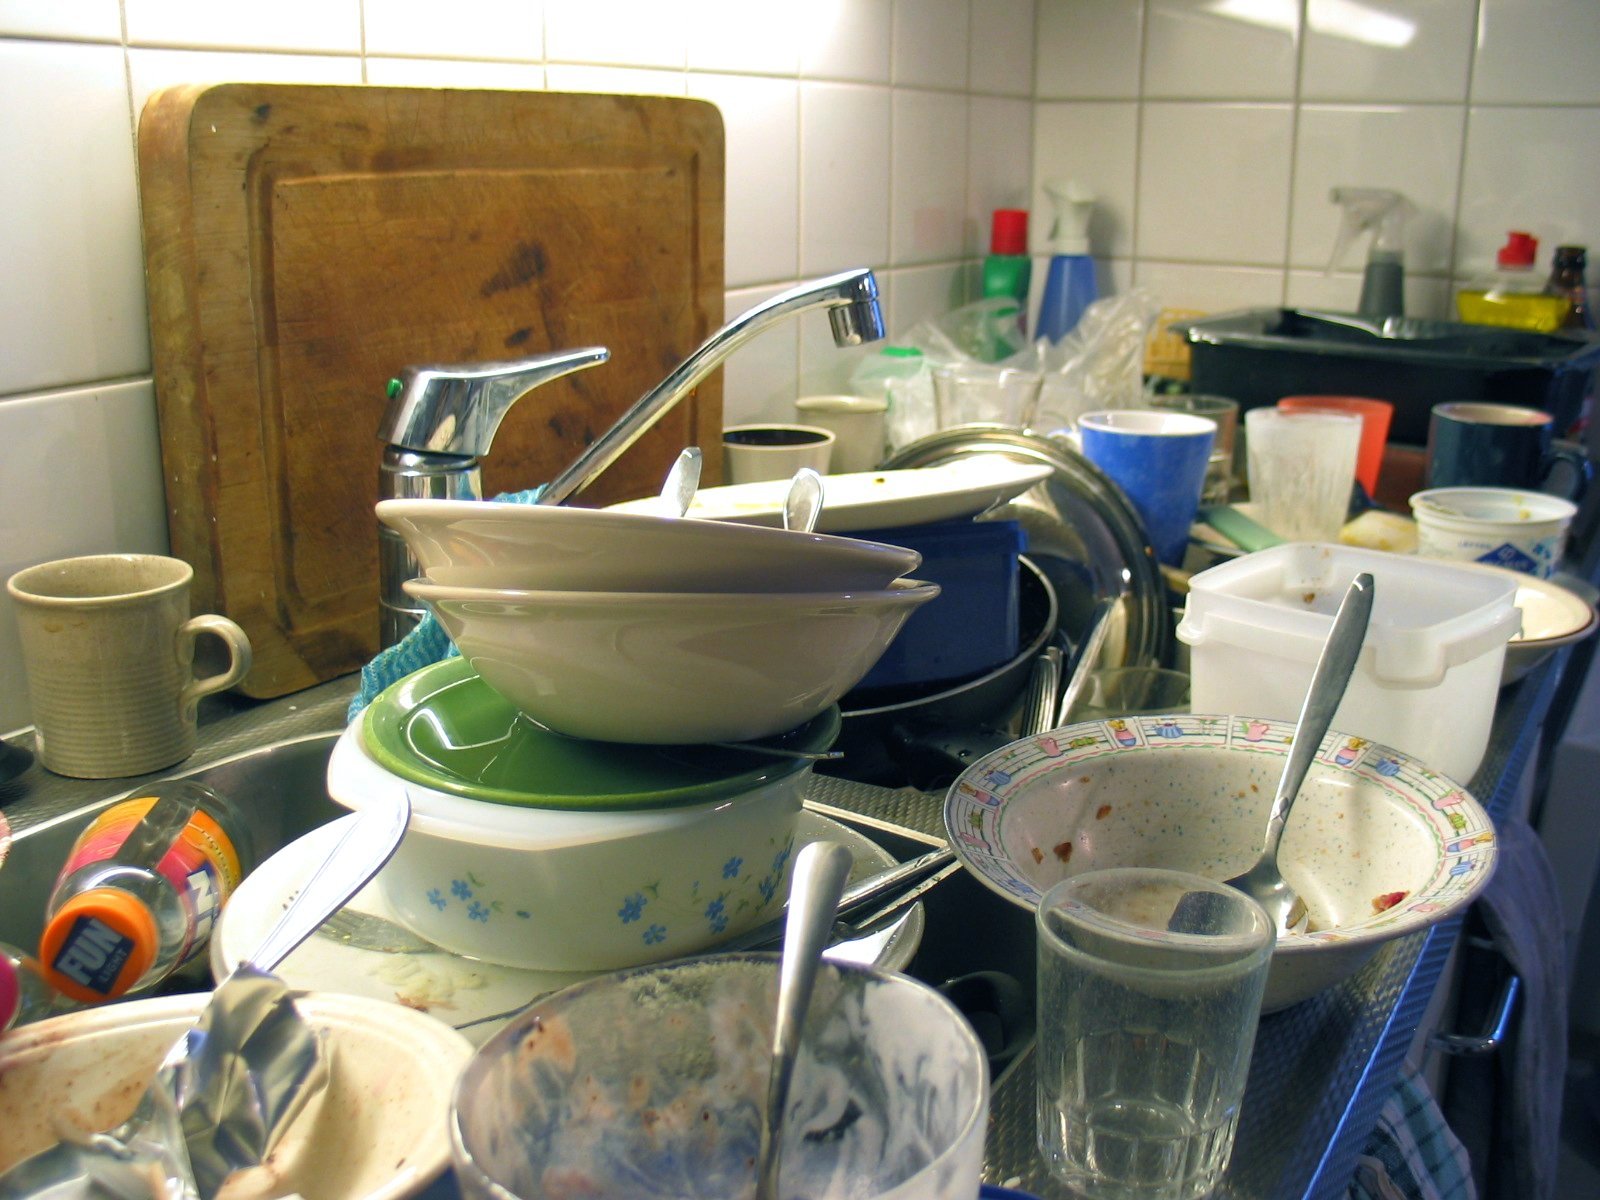 A sink full of dirty dishes